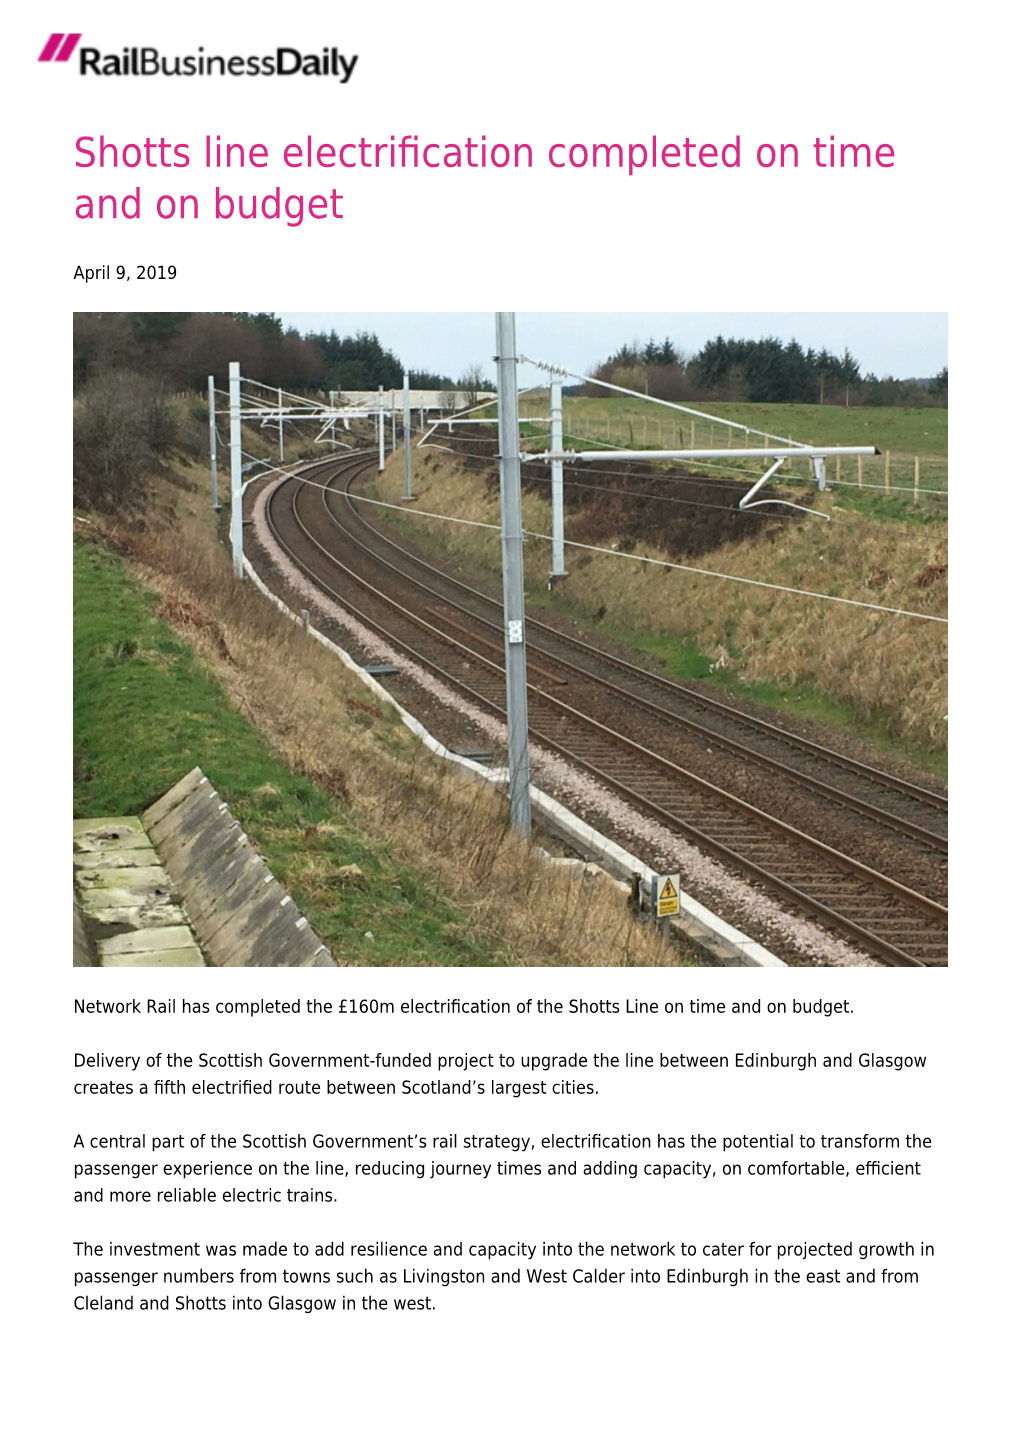 Shotts Line Electrification Completed on Time and on Budget